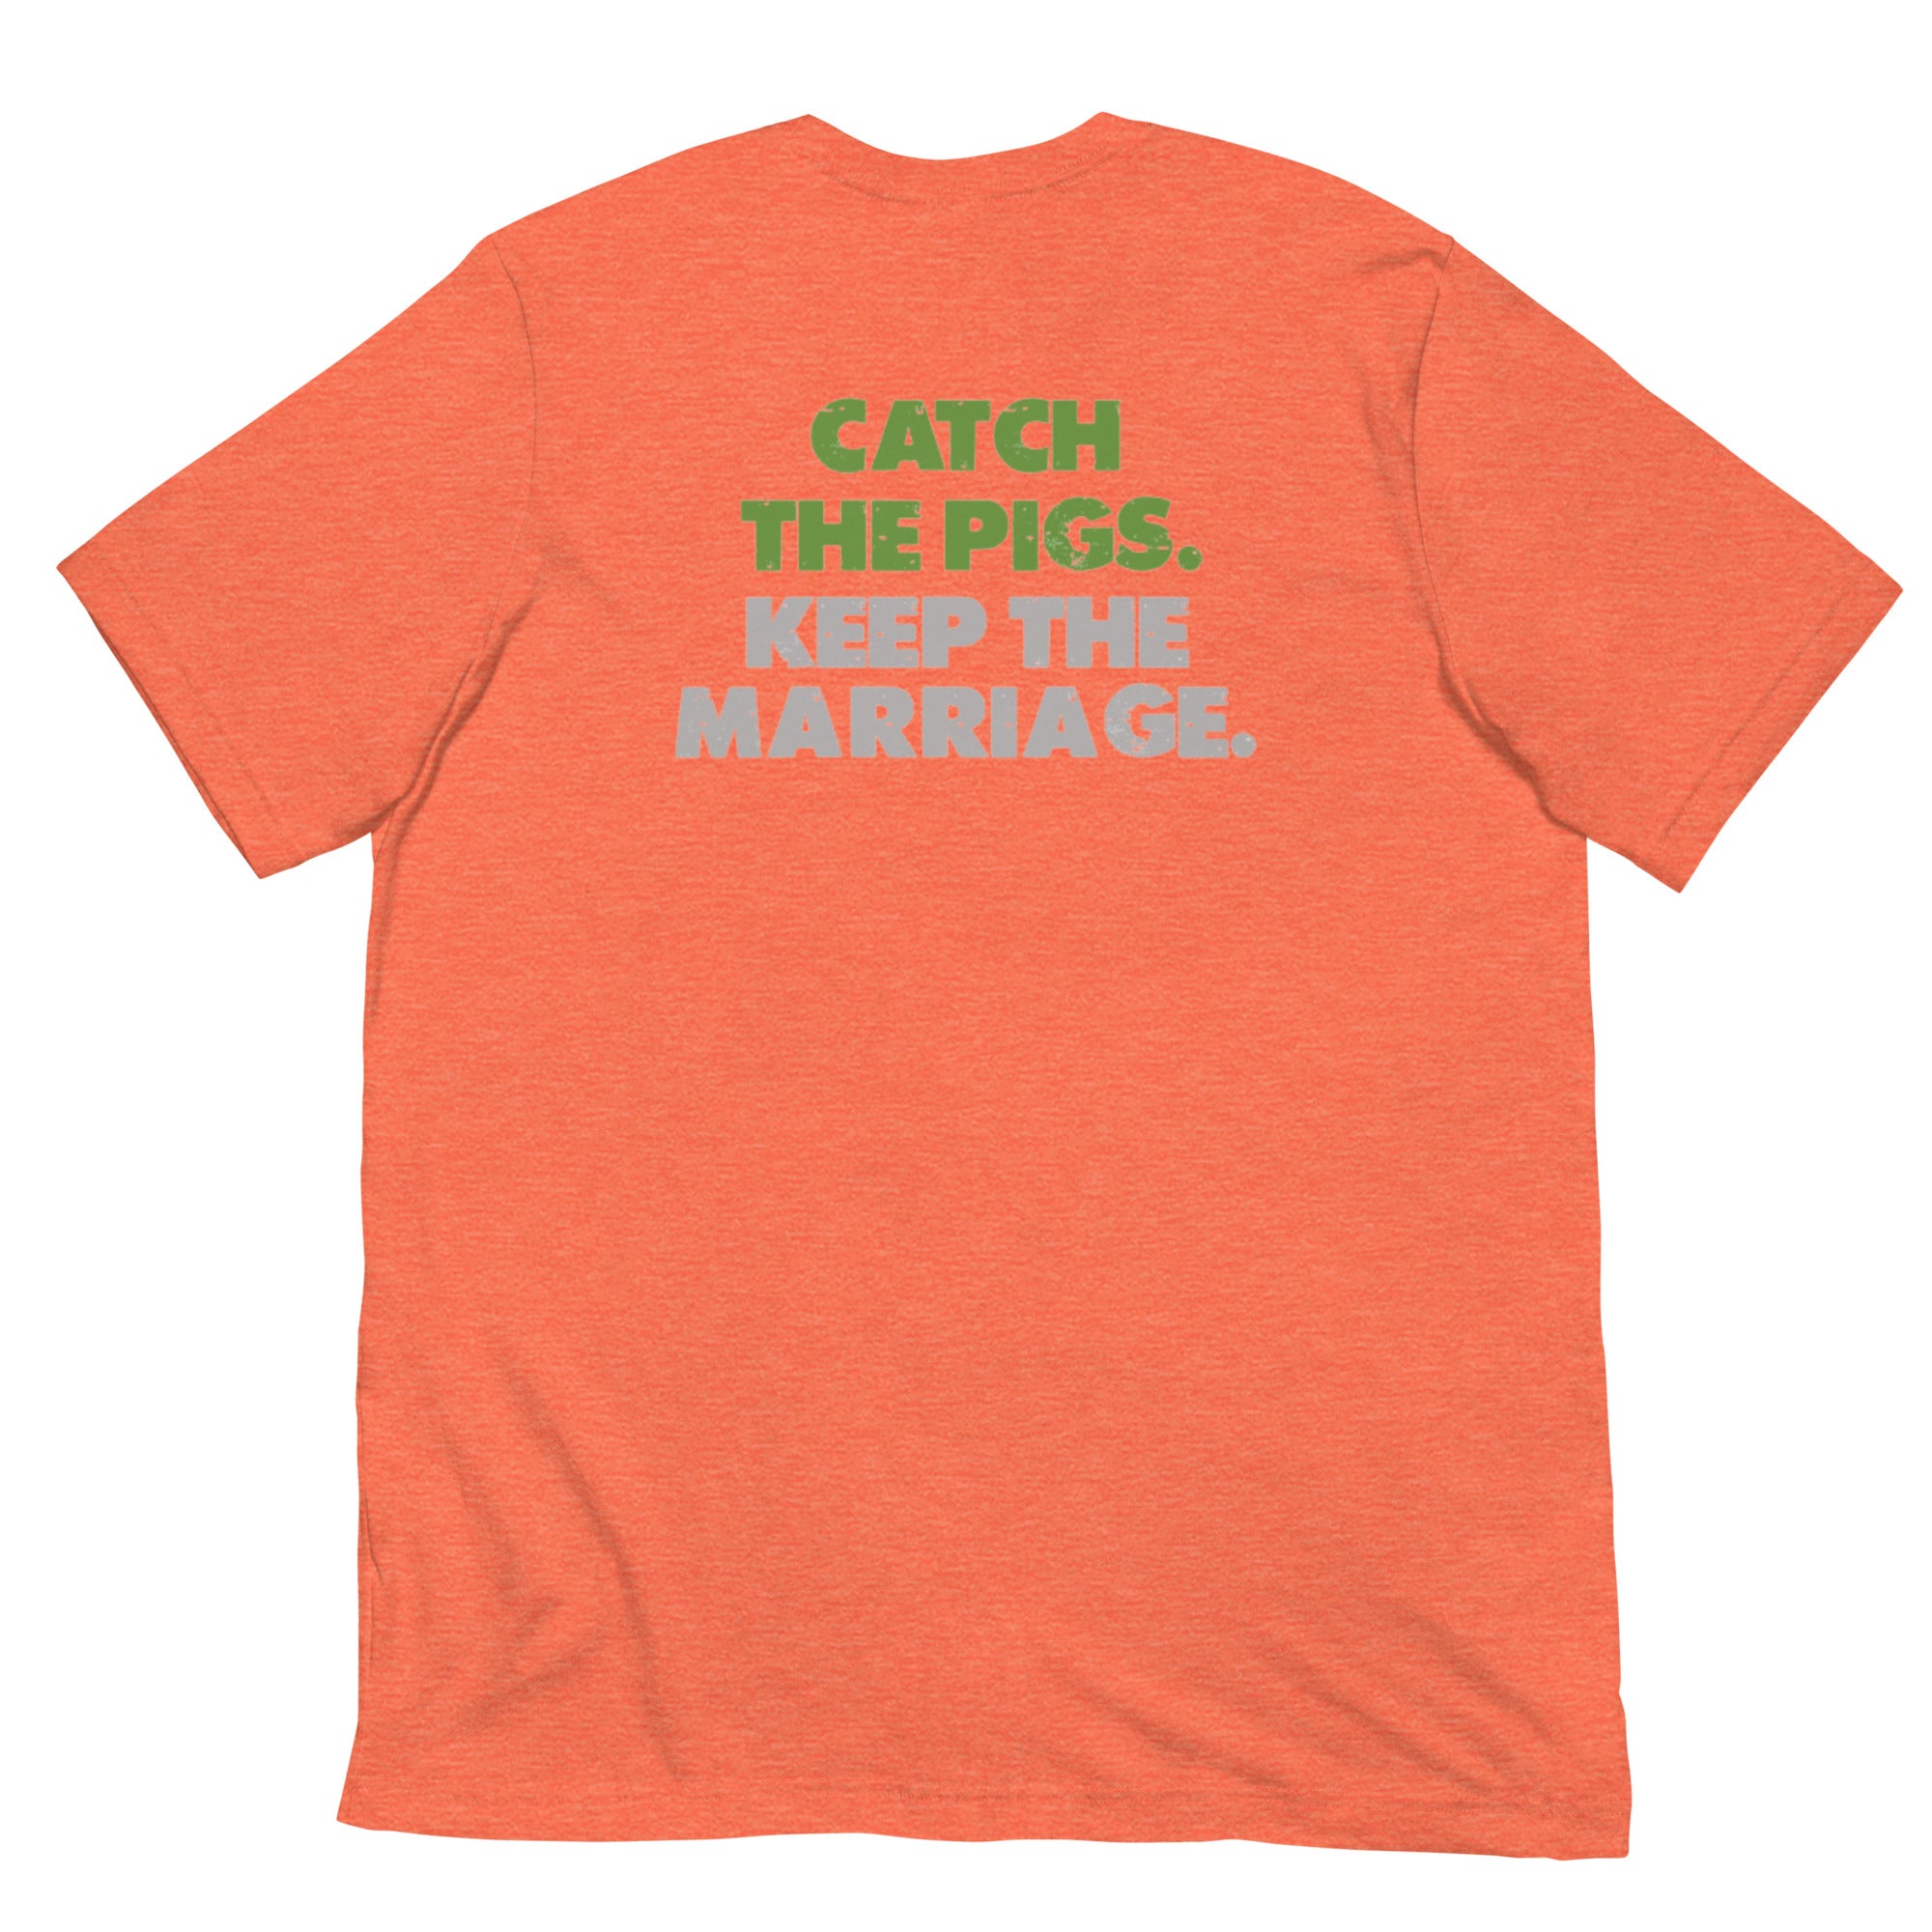 Catch the Pigs. Keep the Marriage. - Short-Sleeve Unisex T-Shirt